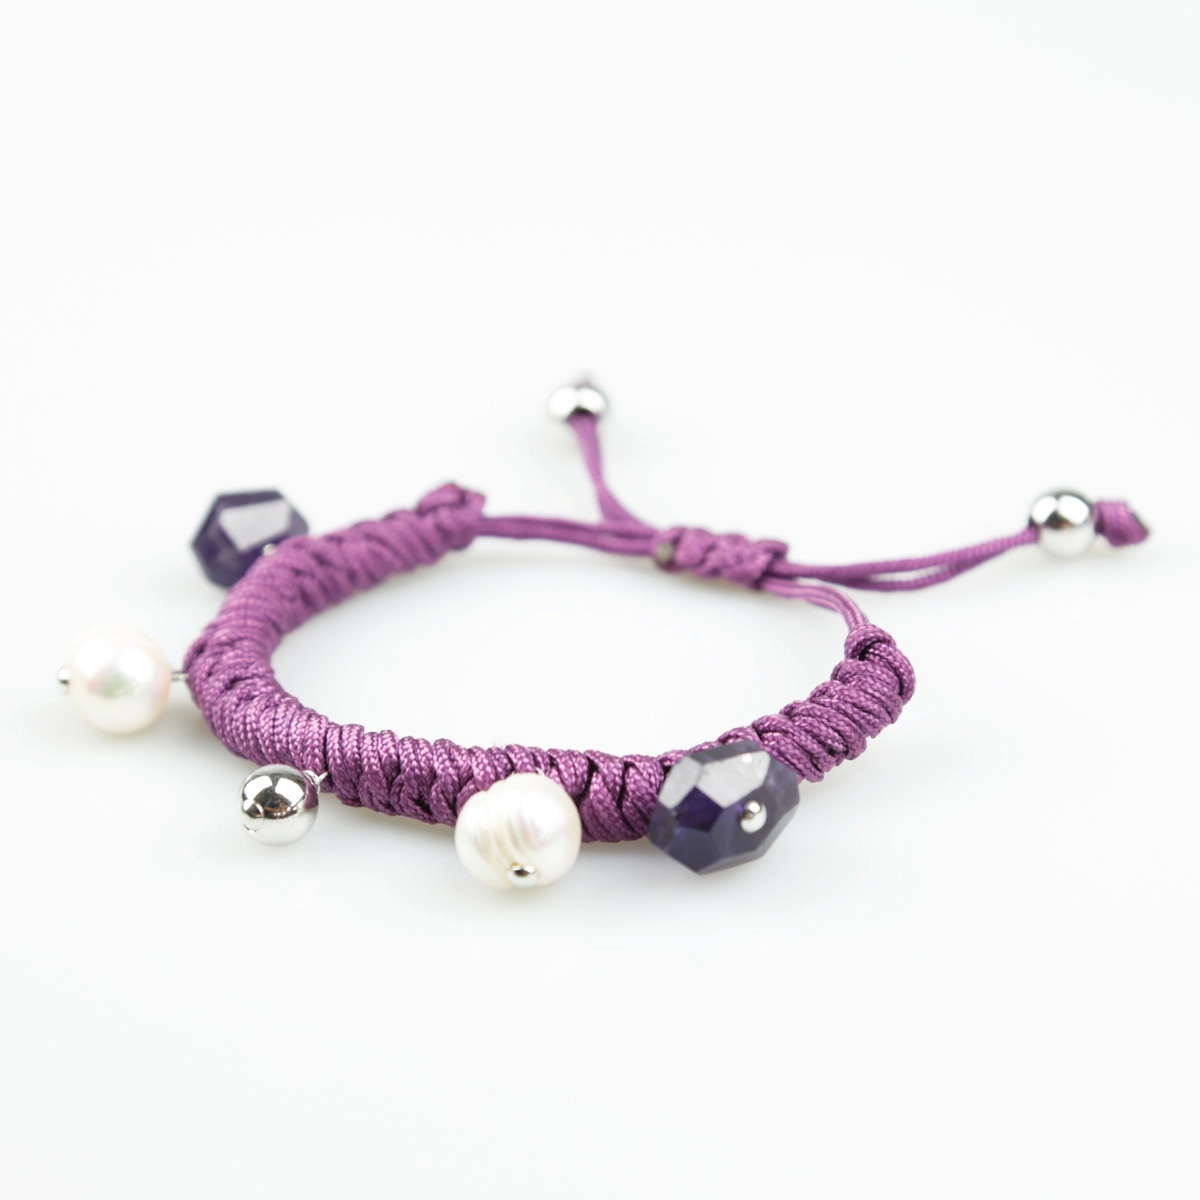 BRACELET KNOTTED PURPLE WITH CHARMS BUFPU52B PATRICIA GARCIA